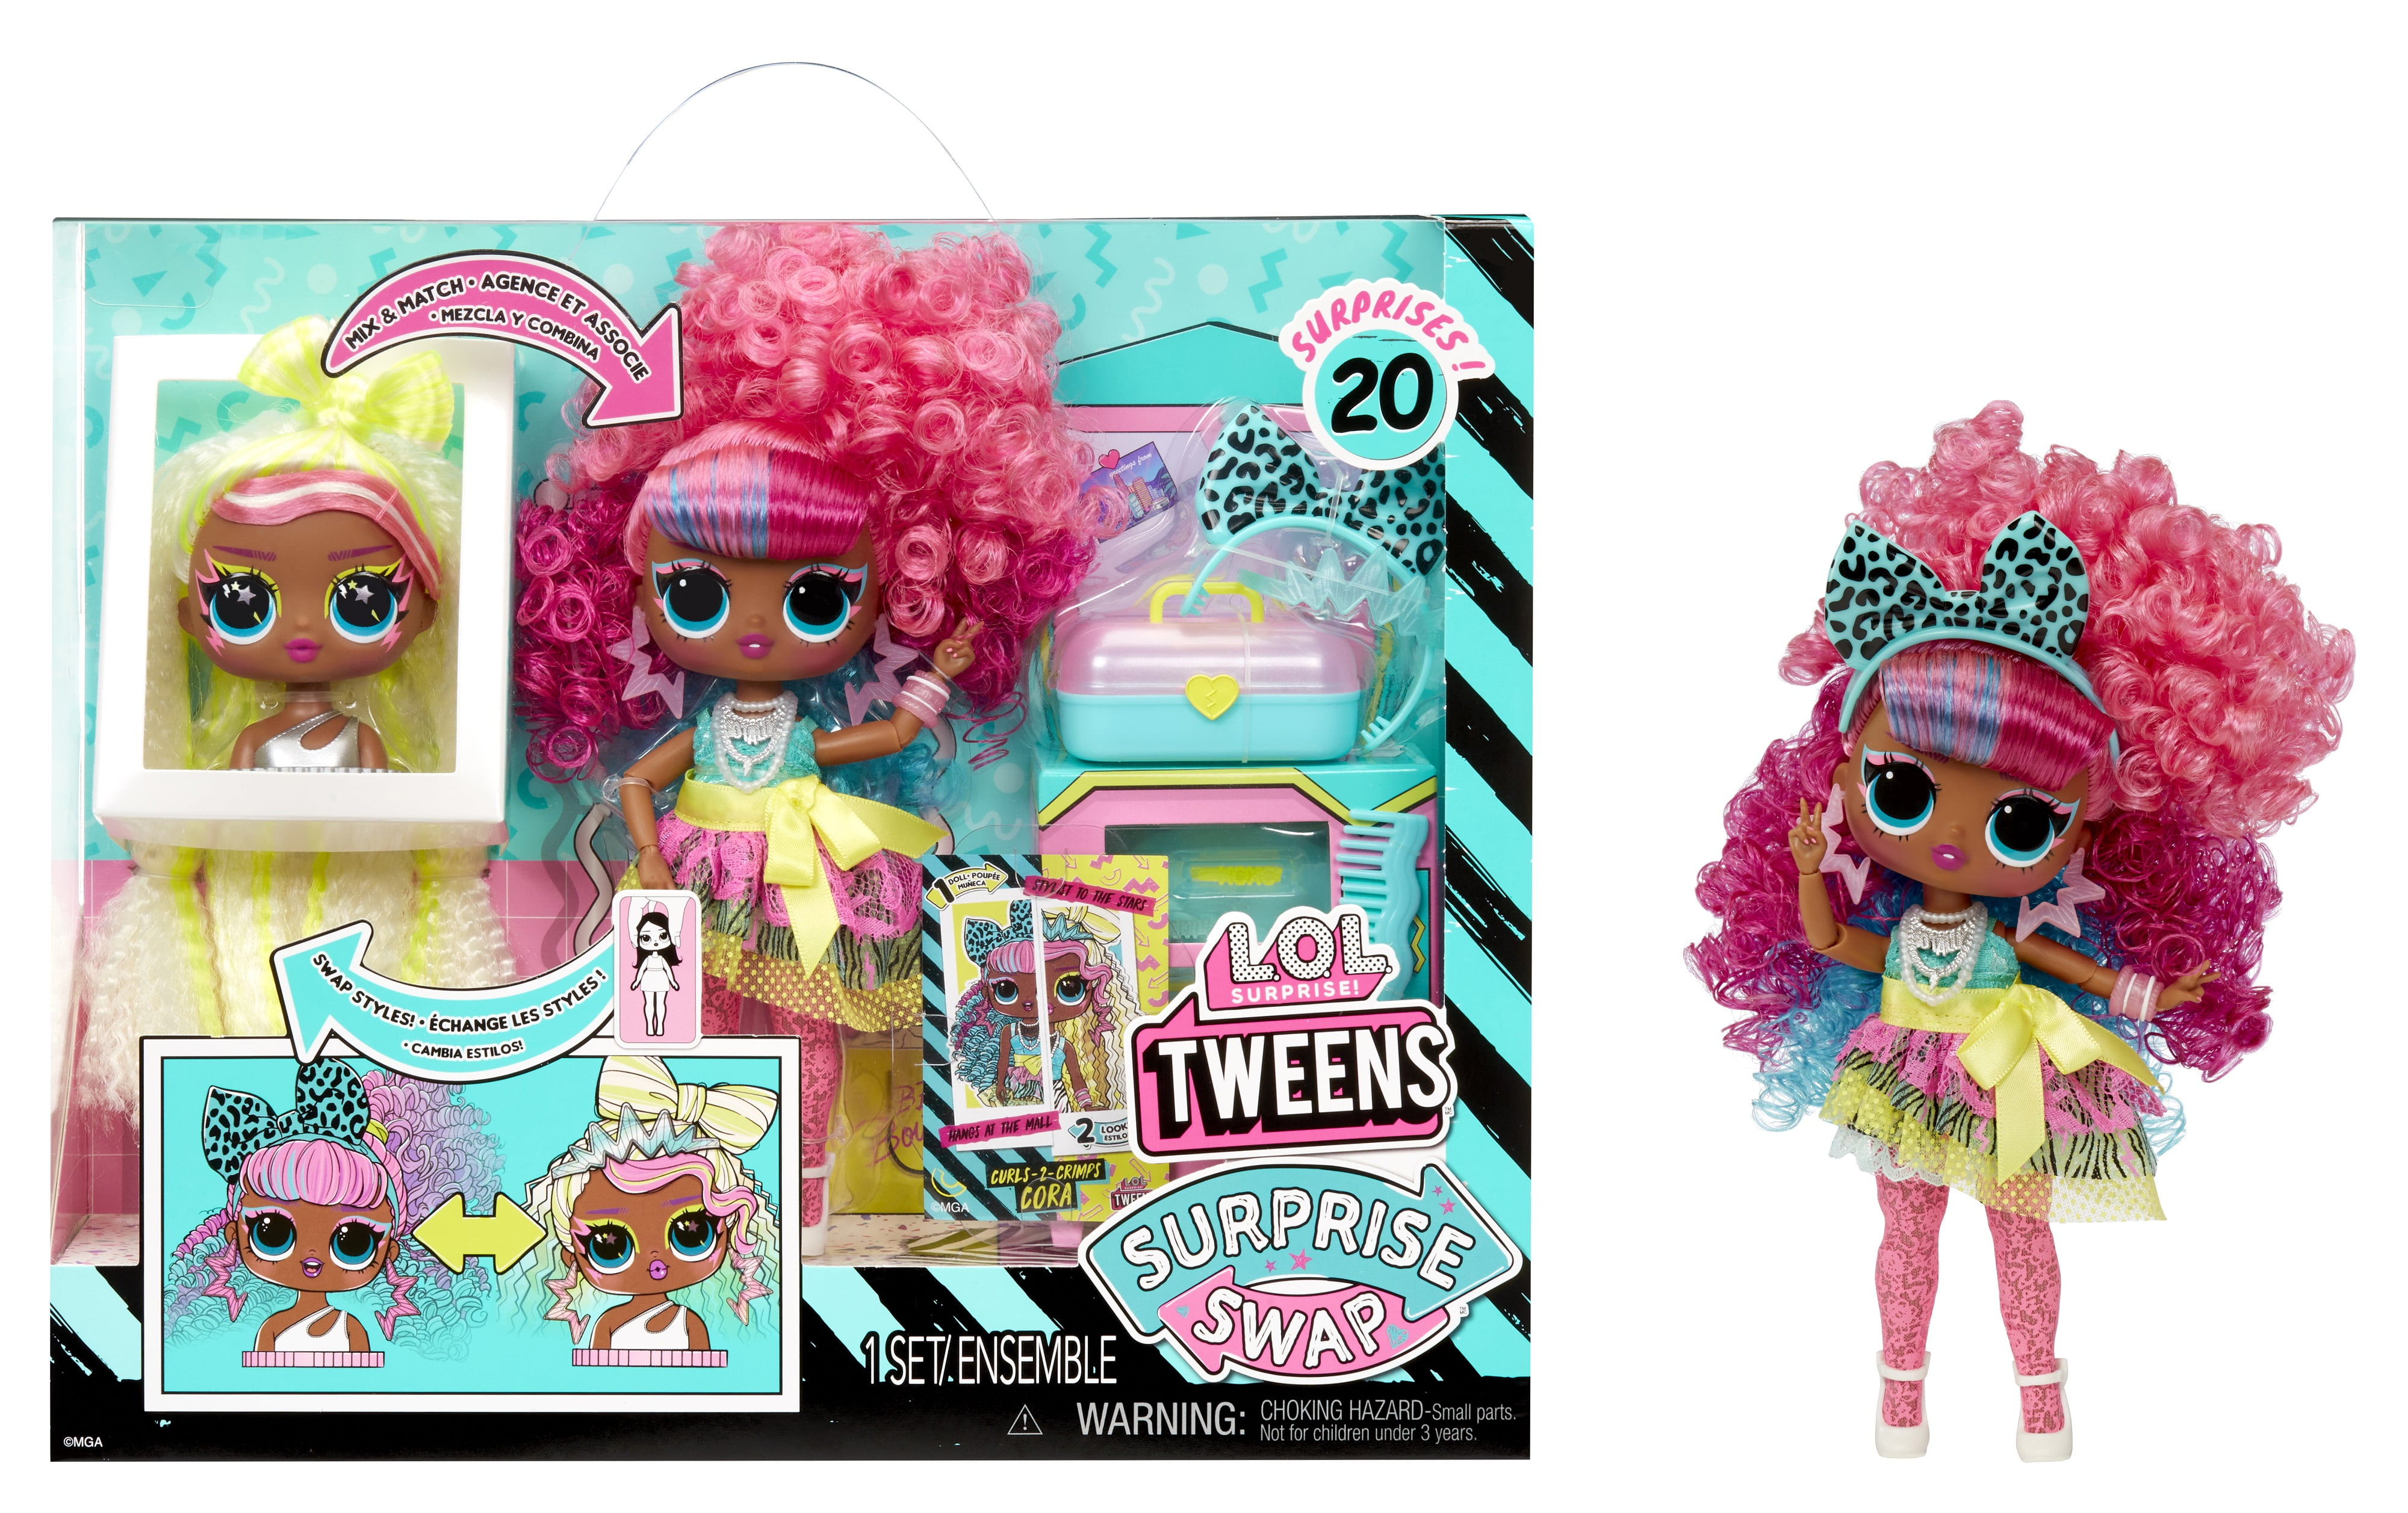  LOL Surprise Tweens Cherry BB Fashion Doll with 15 Surprises,  Pink Hair, Including Stylish Outfit and Accessories with Reusable Bedroom  Playset - Gift for Kids, Toys for Girls Boys Ages 4